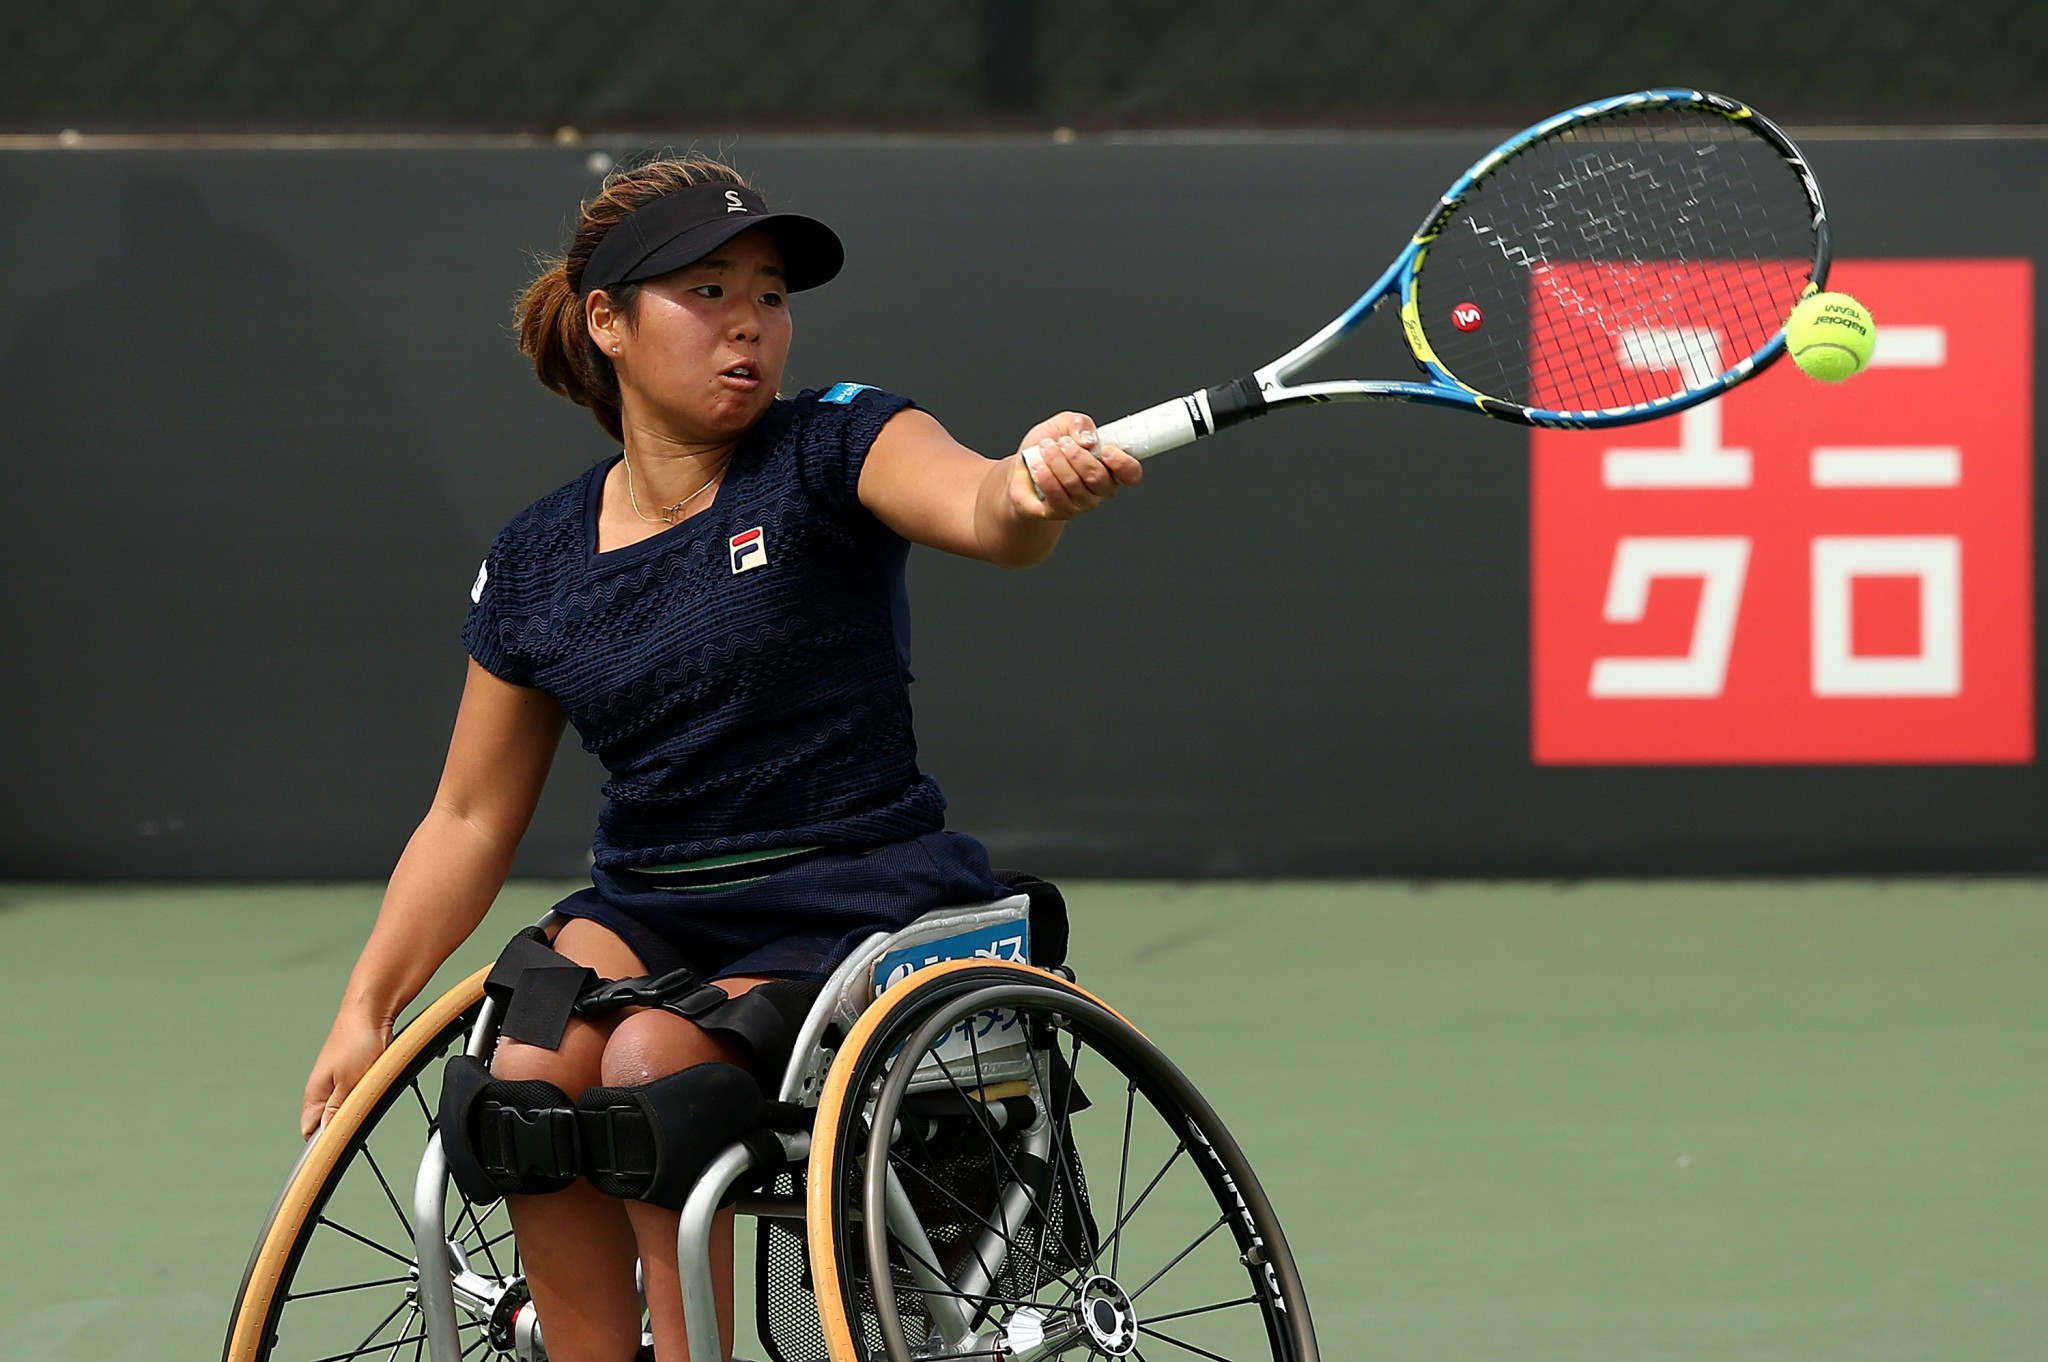 Yui Kamiji of Japan continued her impressive form on the UNIQLO Wheelchair Tennis Tour this season by winning the women's singles title ©Getty Images